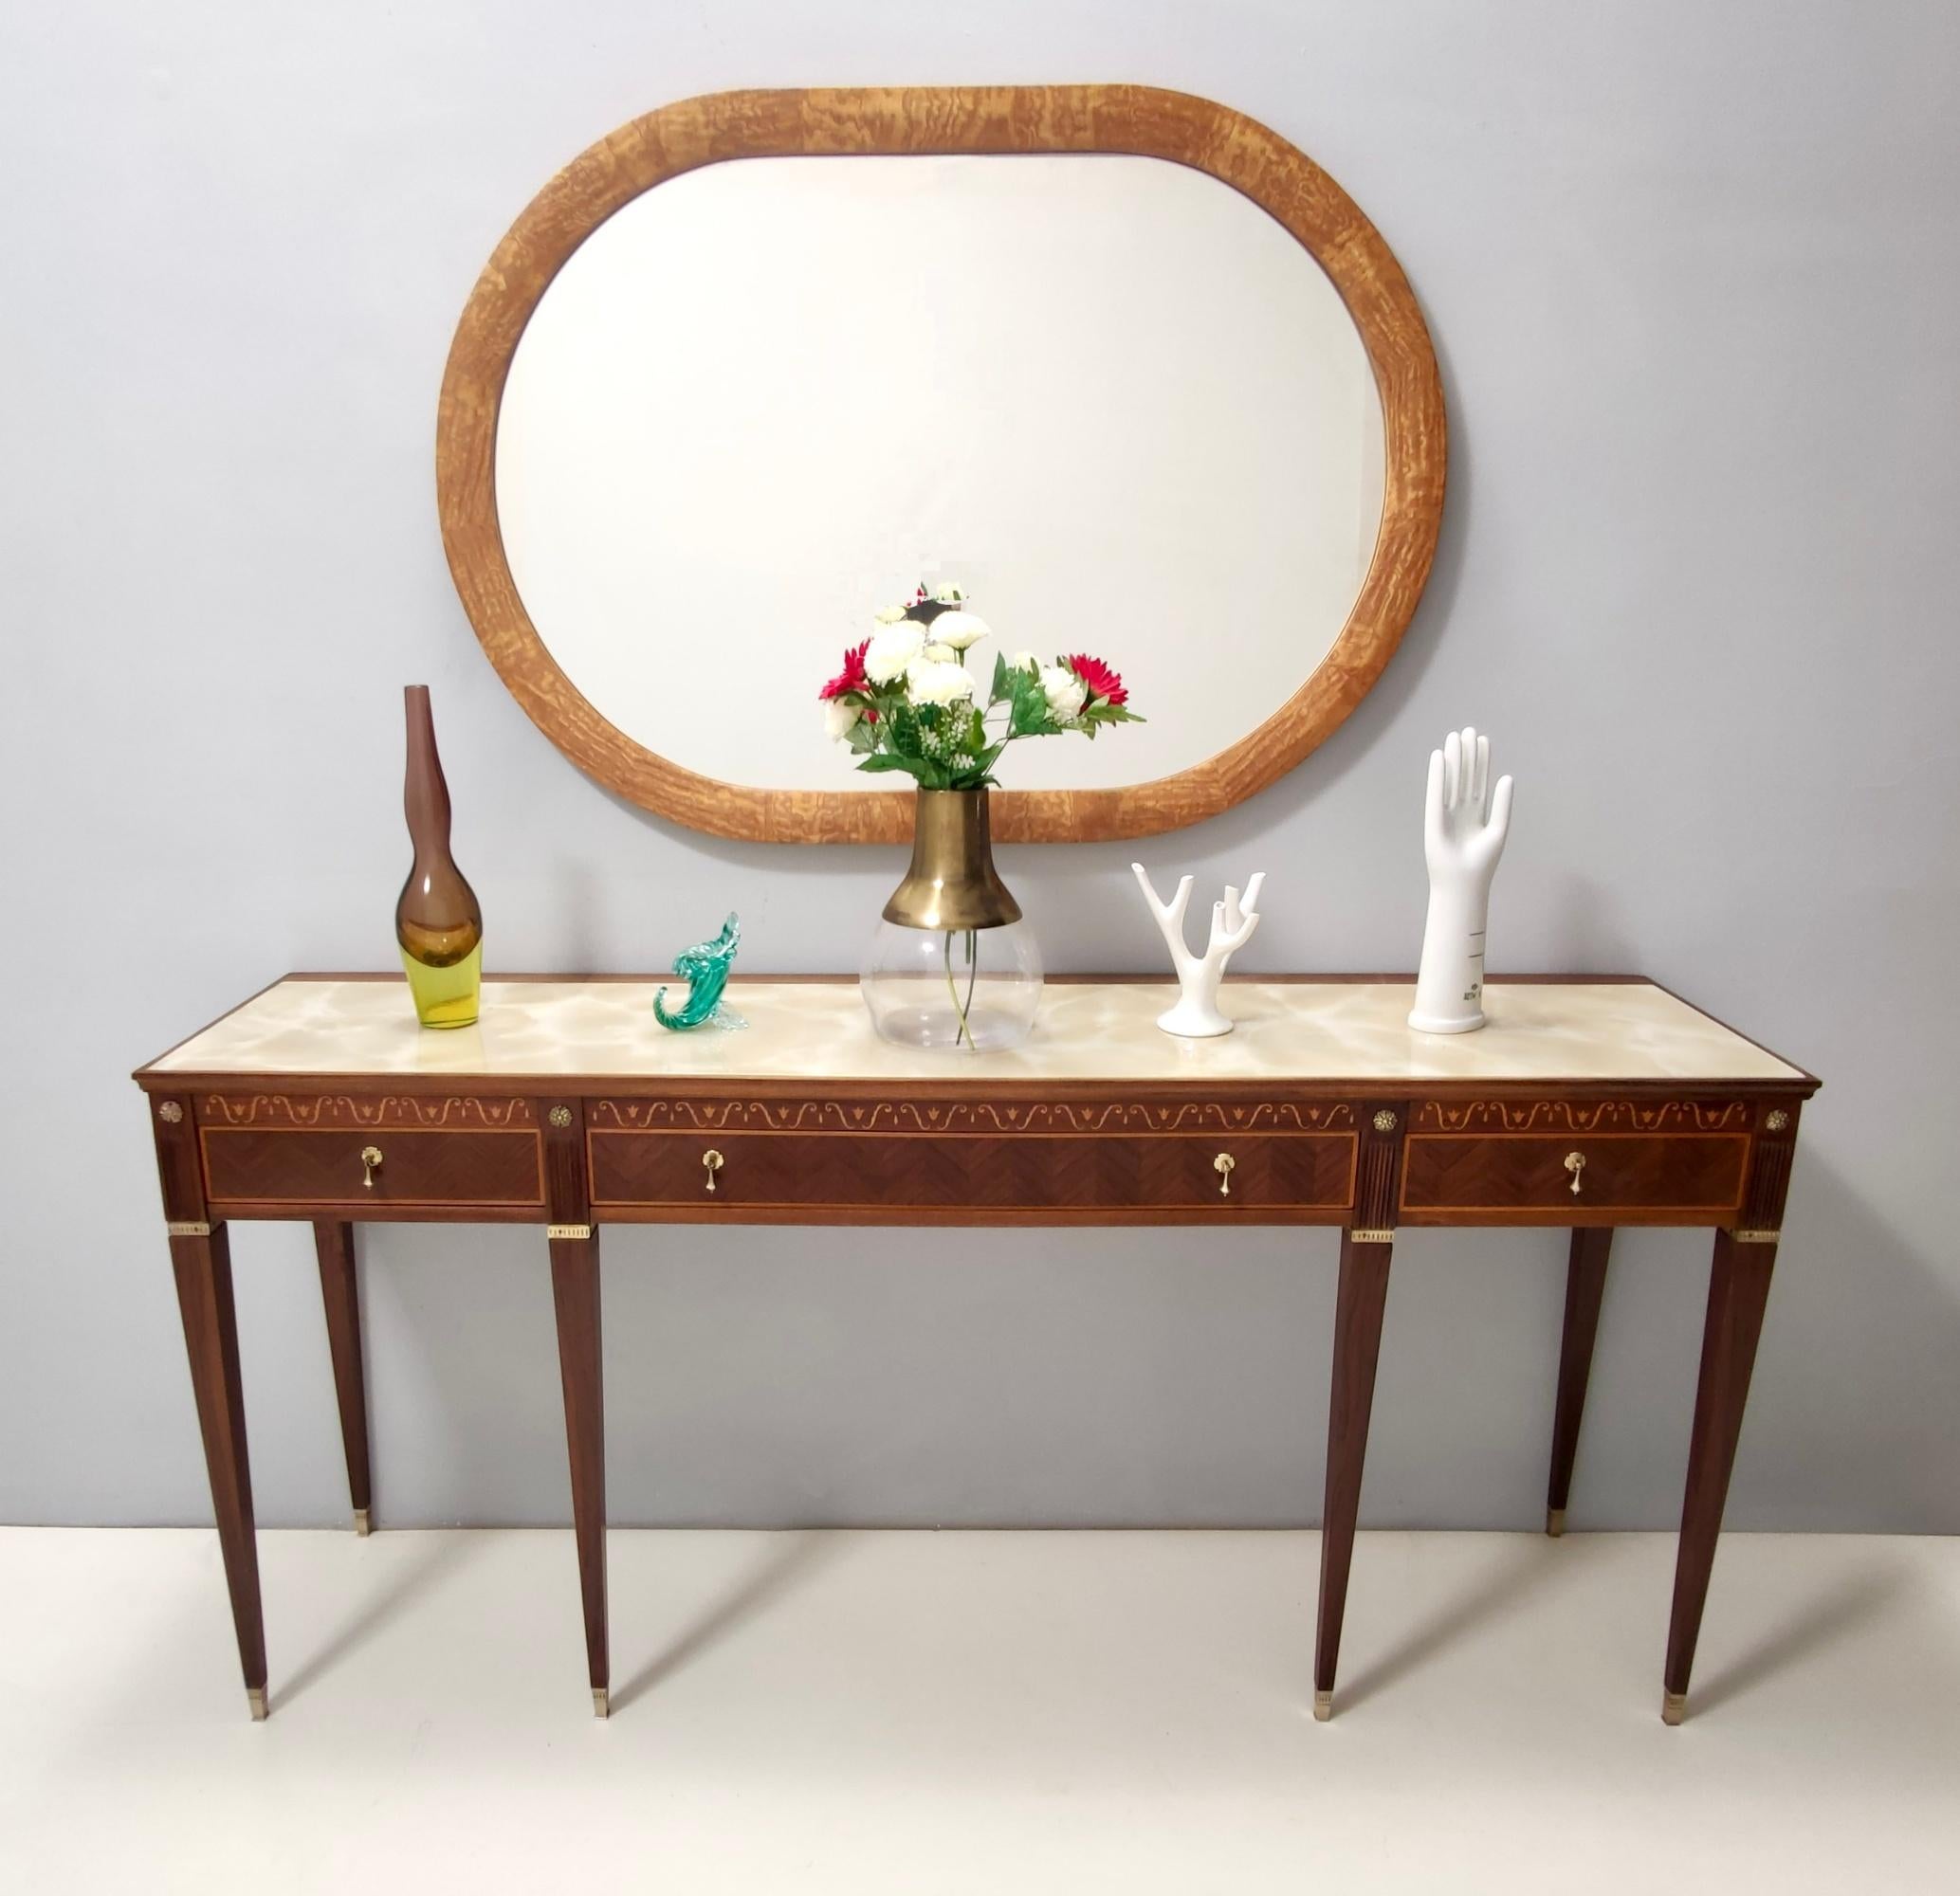 Made in Italy, 1950s.
This mirror features an oval ash root frame.
It might show slight traces of use since it's vintage, but it can be considered as in very good original condition and ready to become a piece in a home. 

Measures:
Width 131